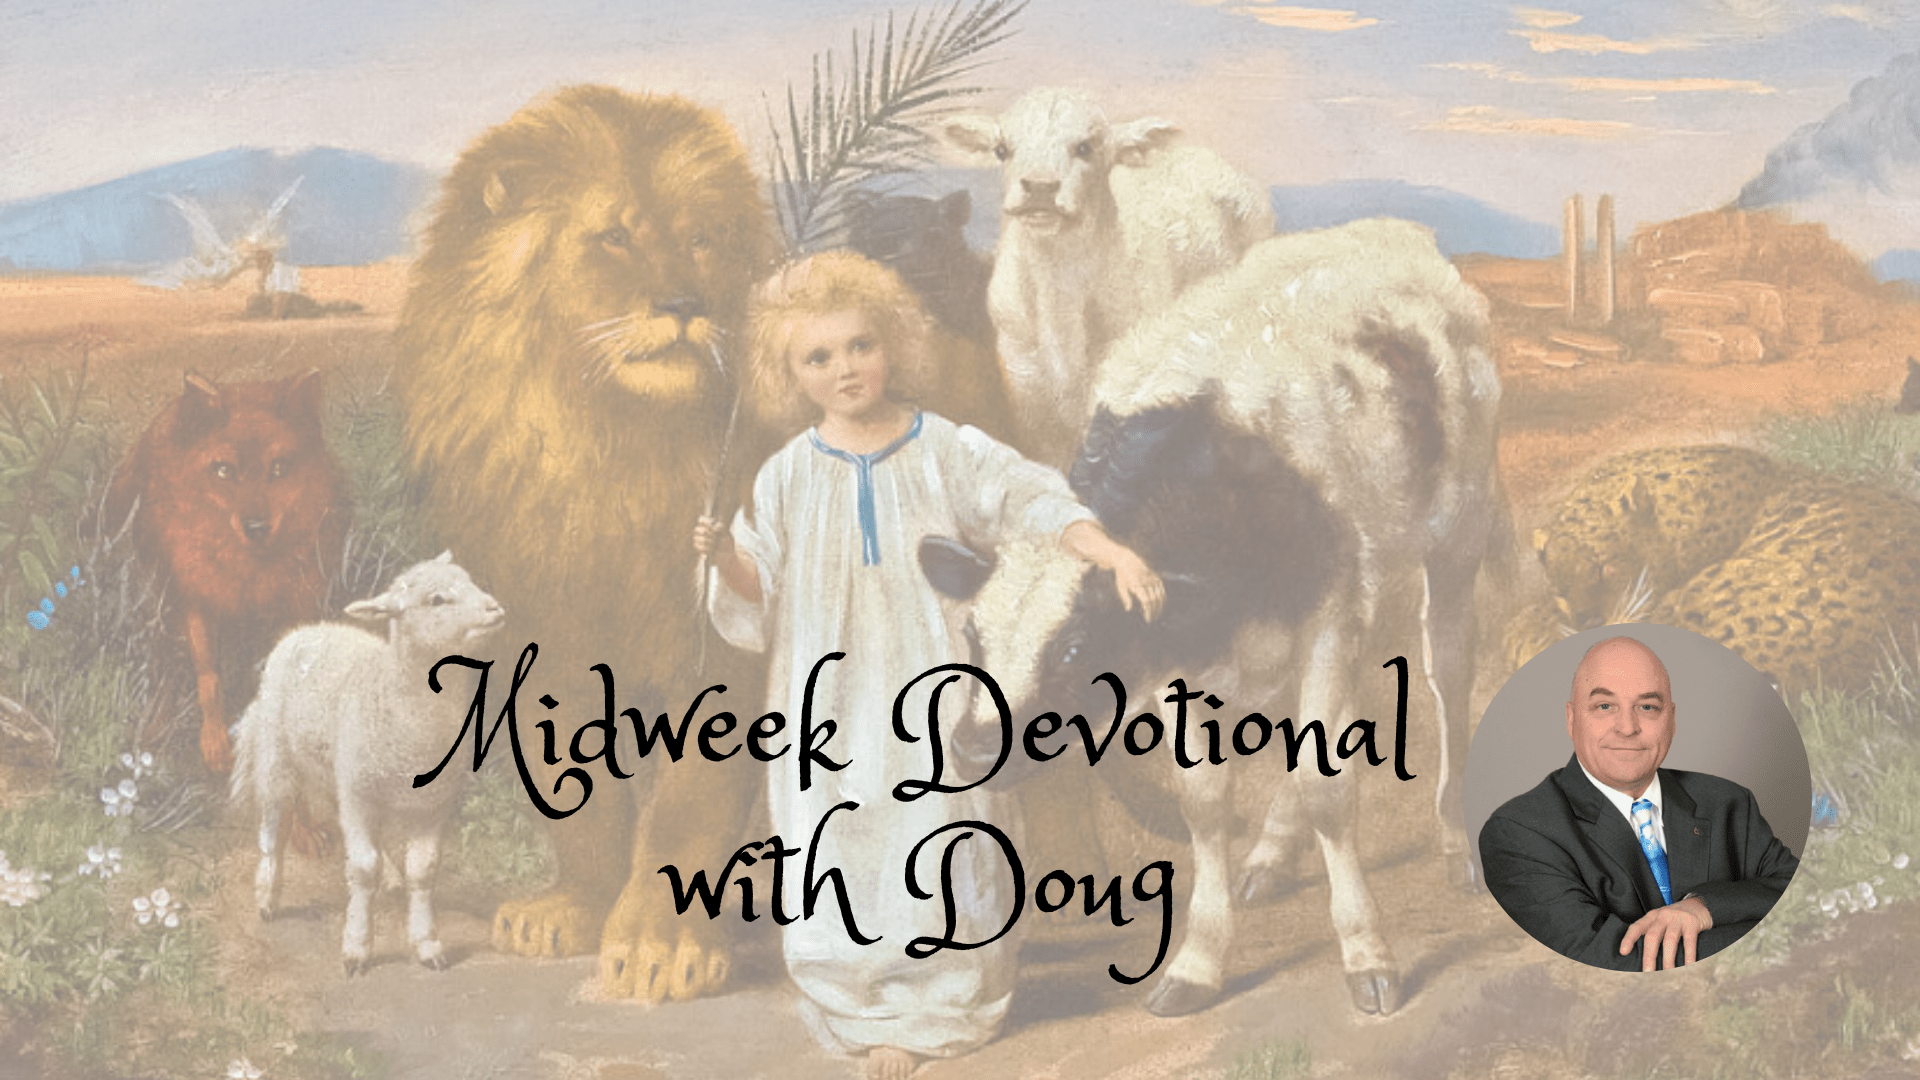 Midweek Devotional with Doug for fourth week in September